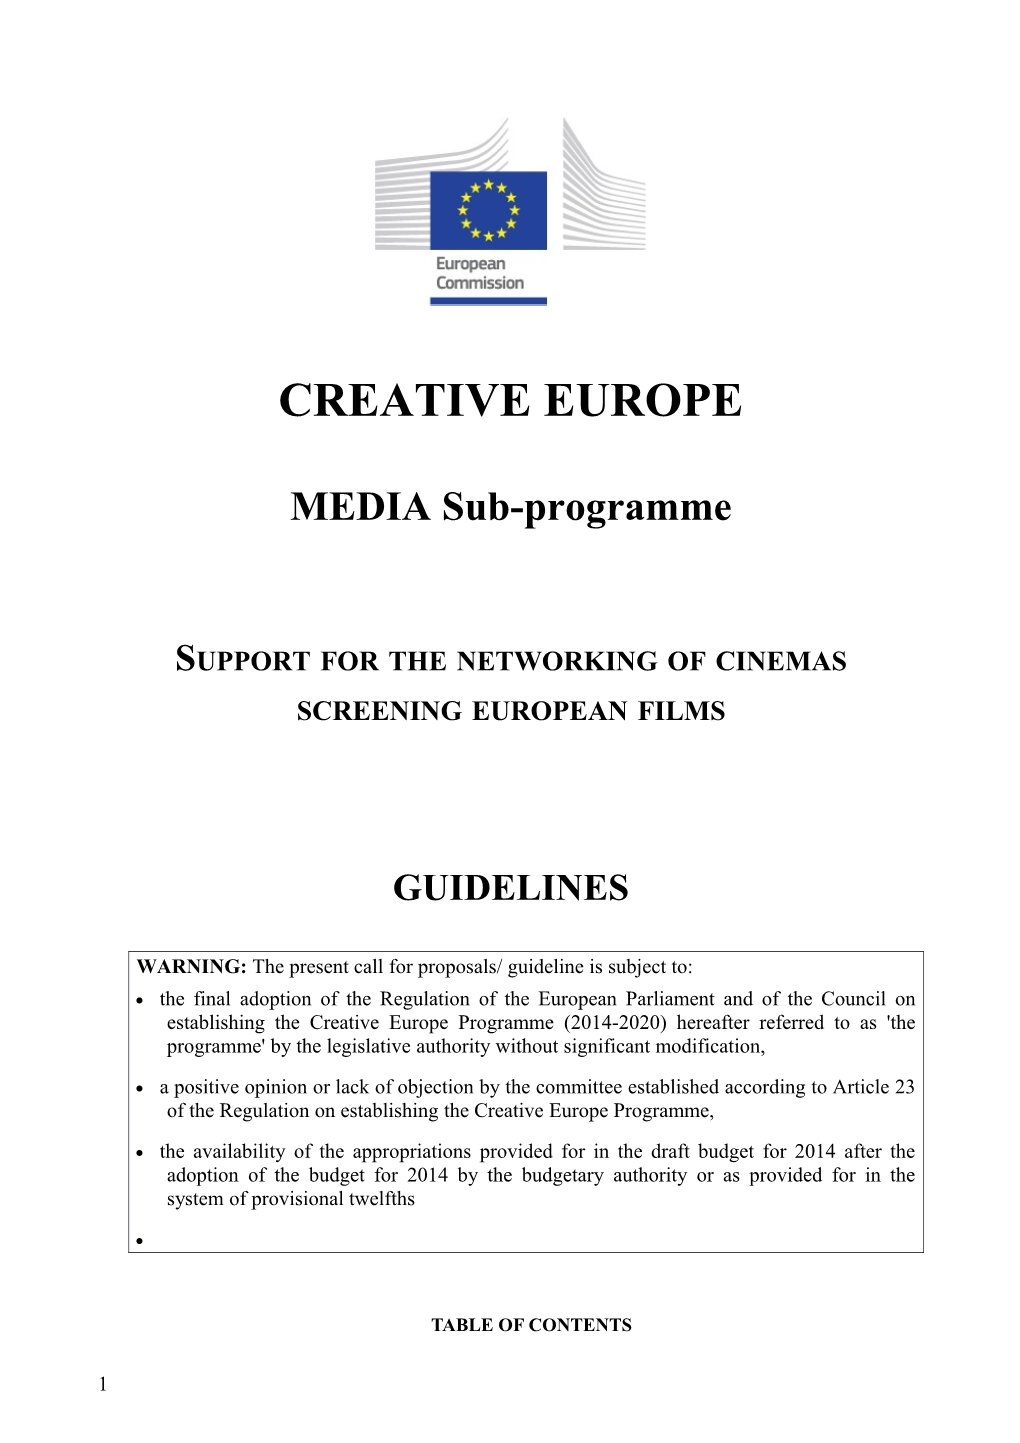 Support for the Networking of Cinemas Screening European Films